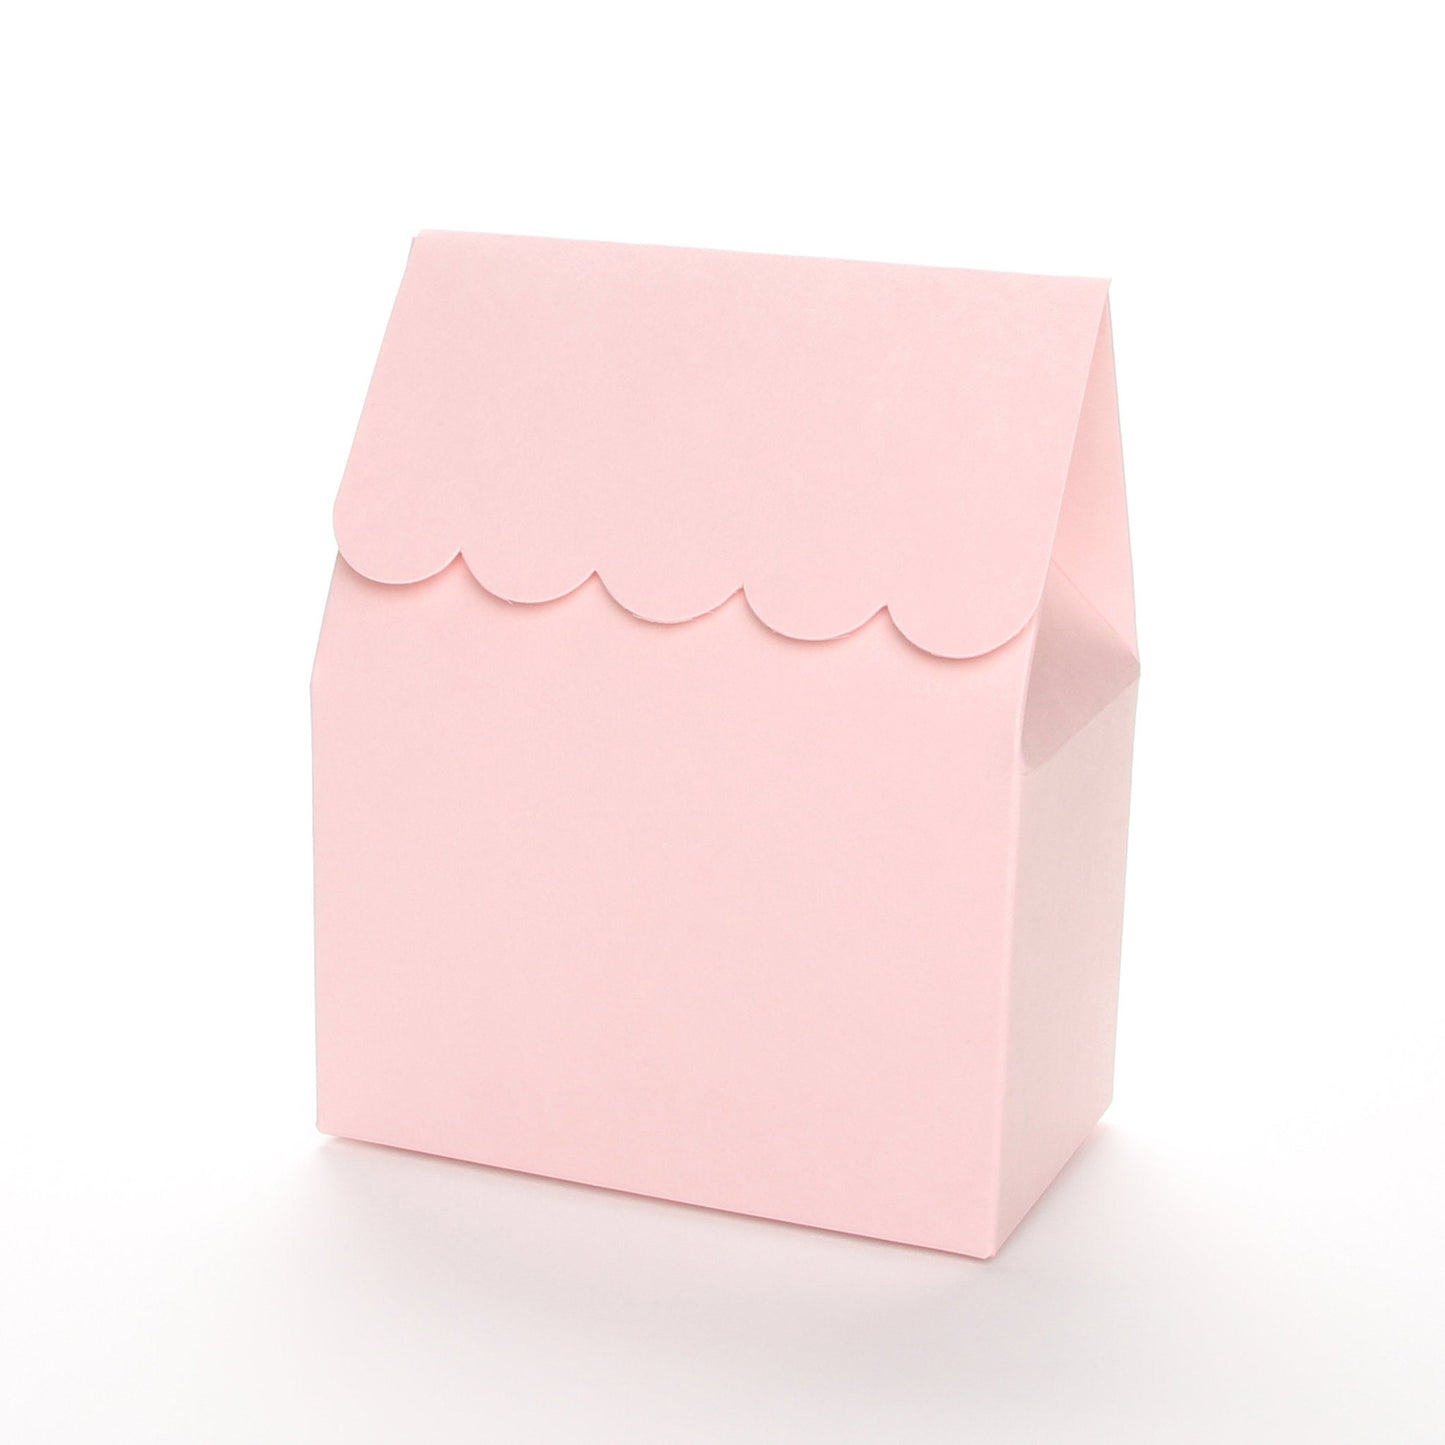 Pink favor box by Lux Party with a scalloped edge on a white background.